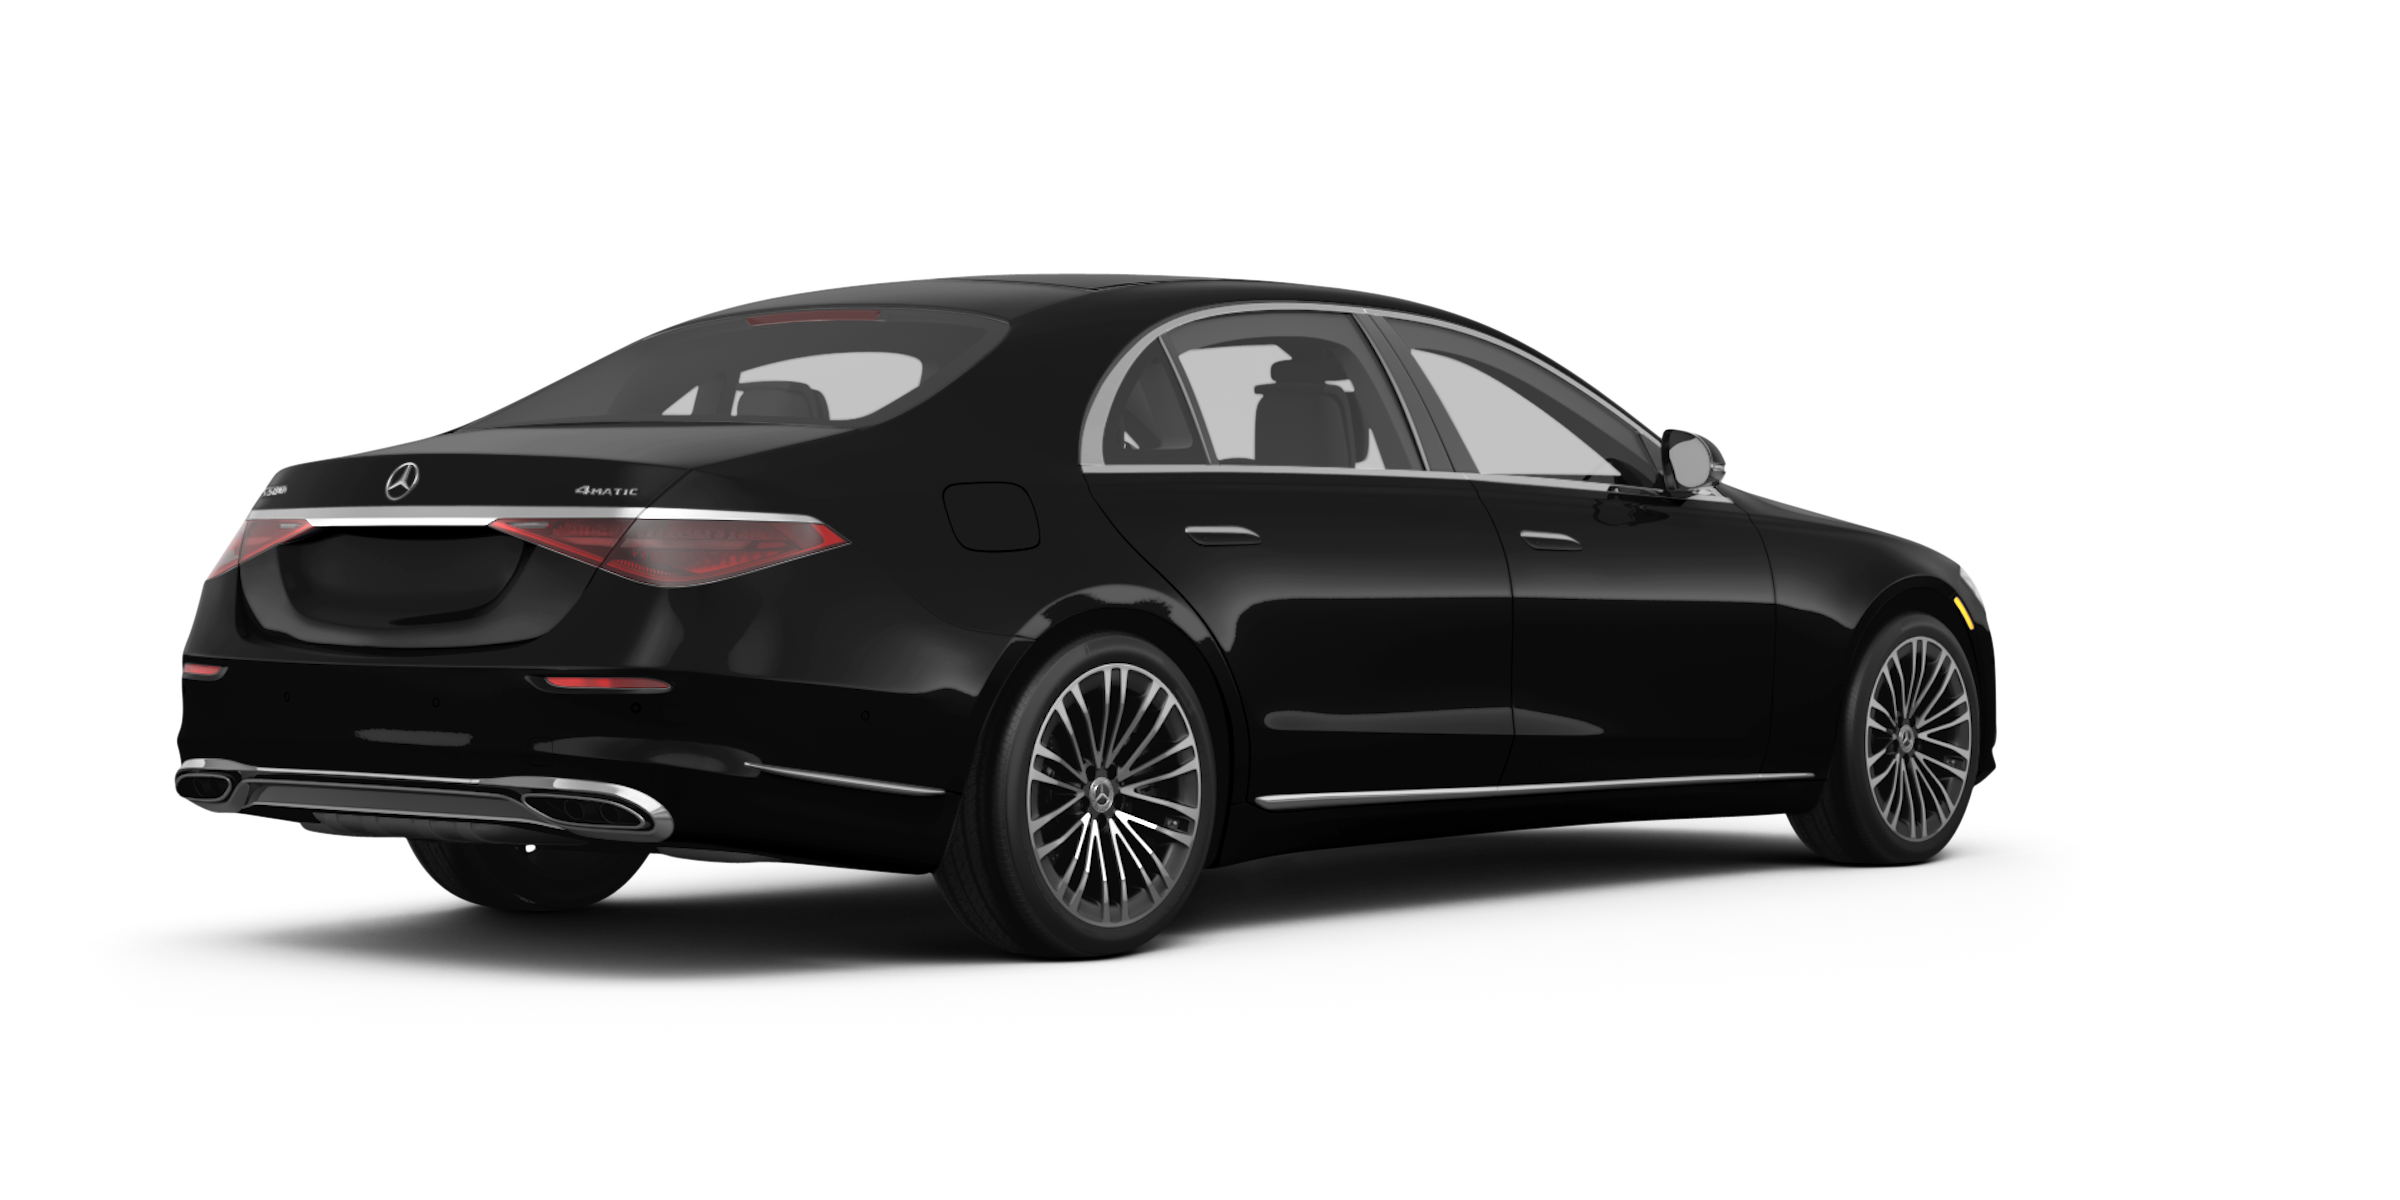 30-degree angle view of the Carey Luxury Sedan - 2023 Mercedes-Benz S Class.